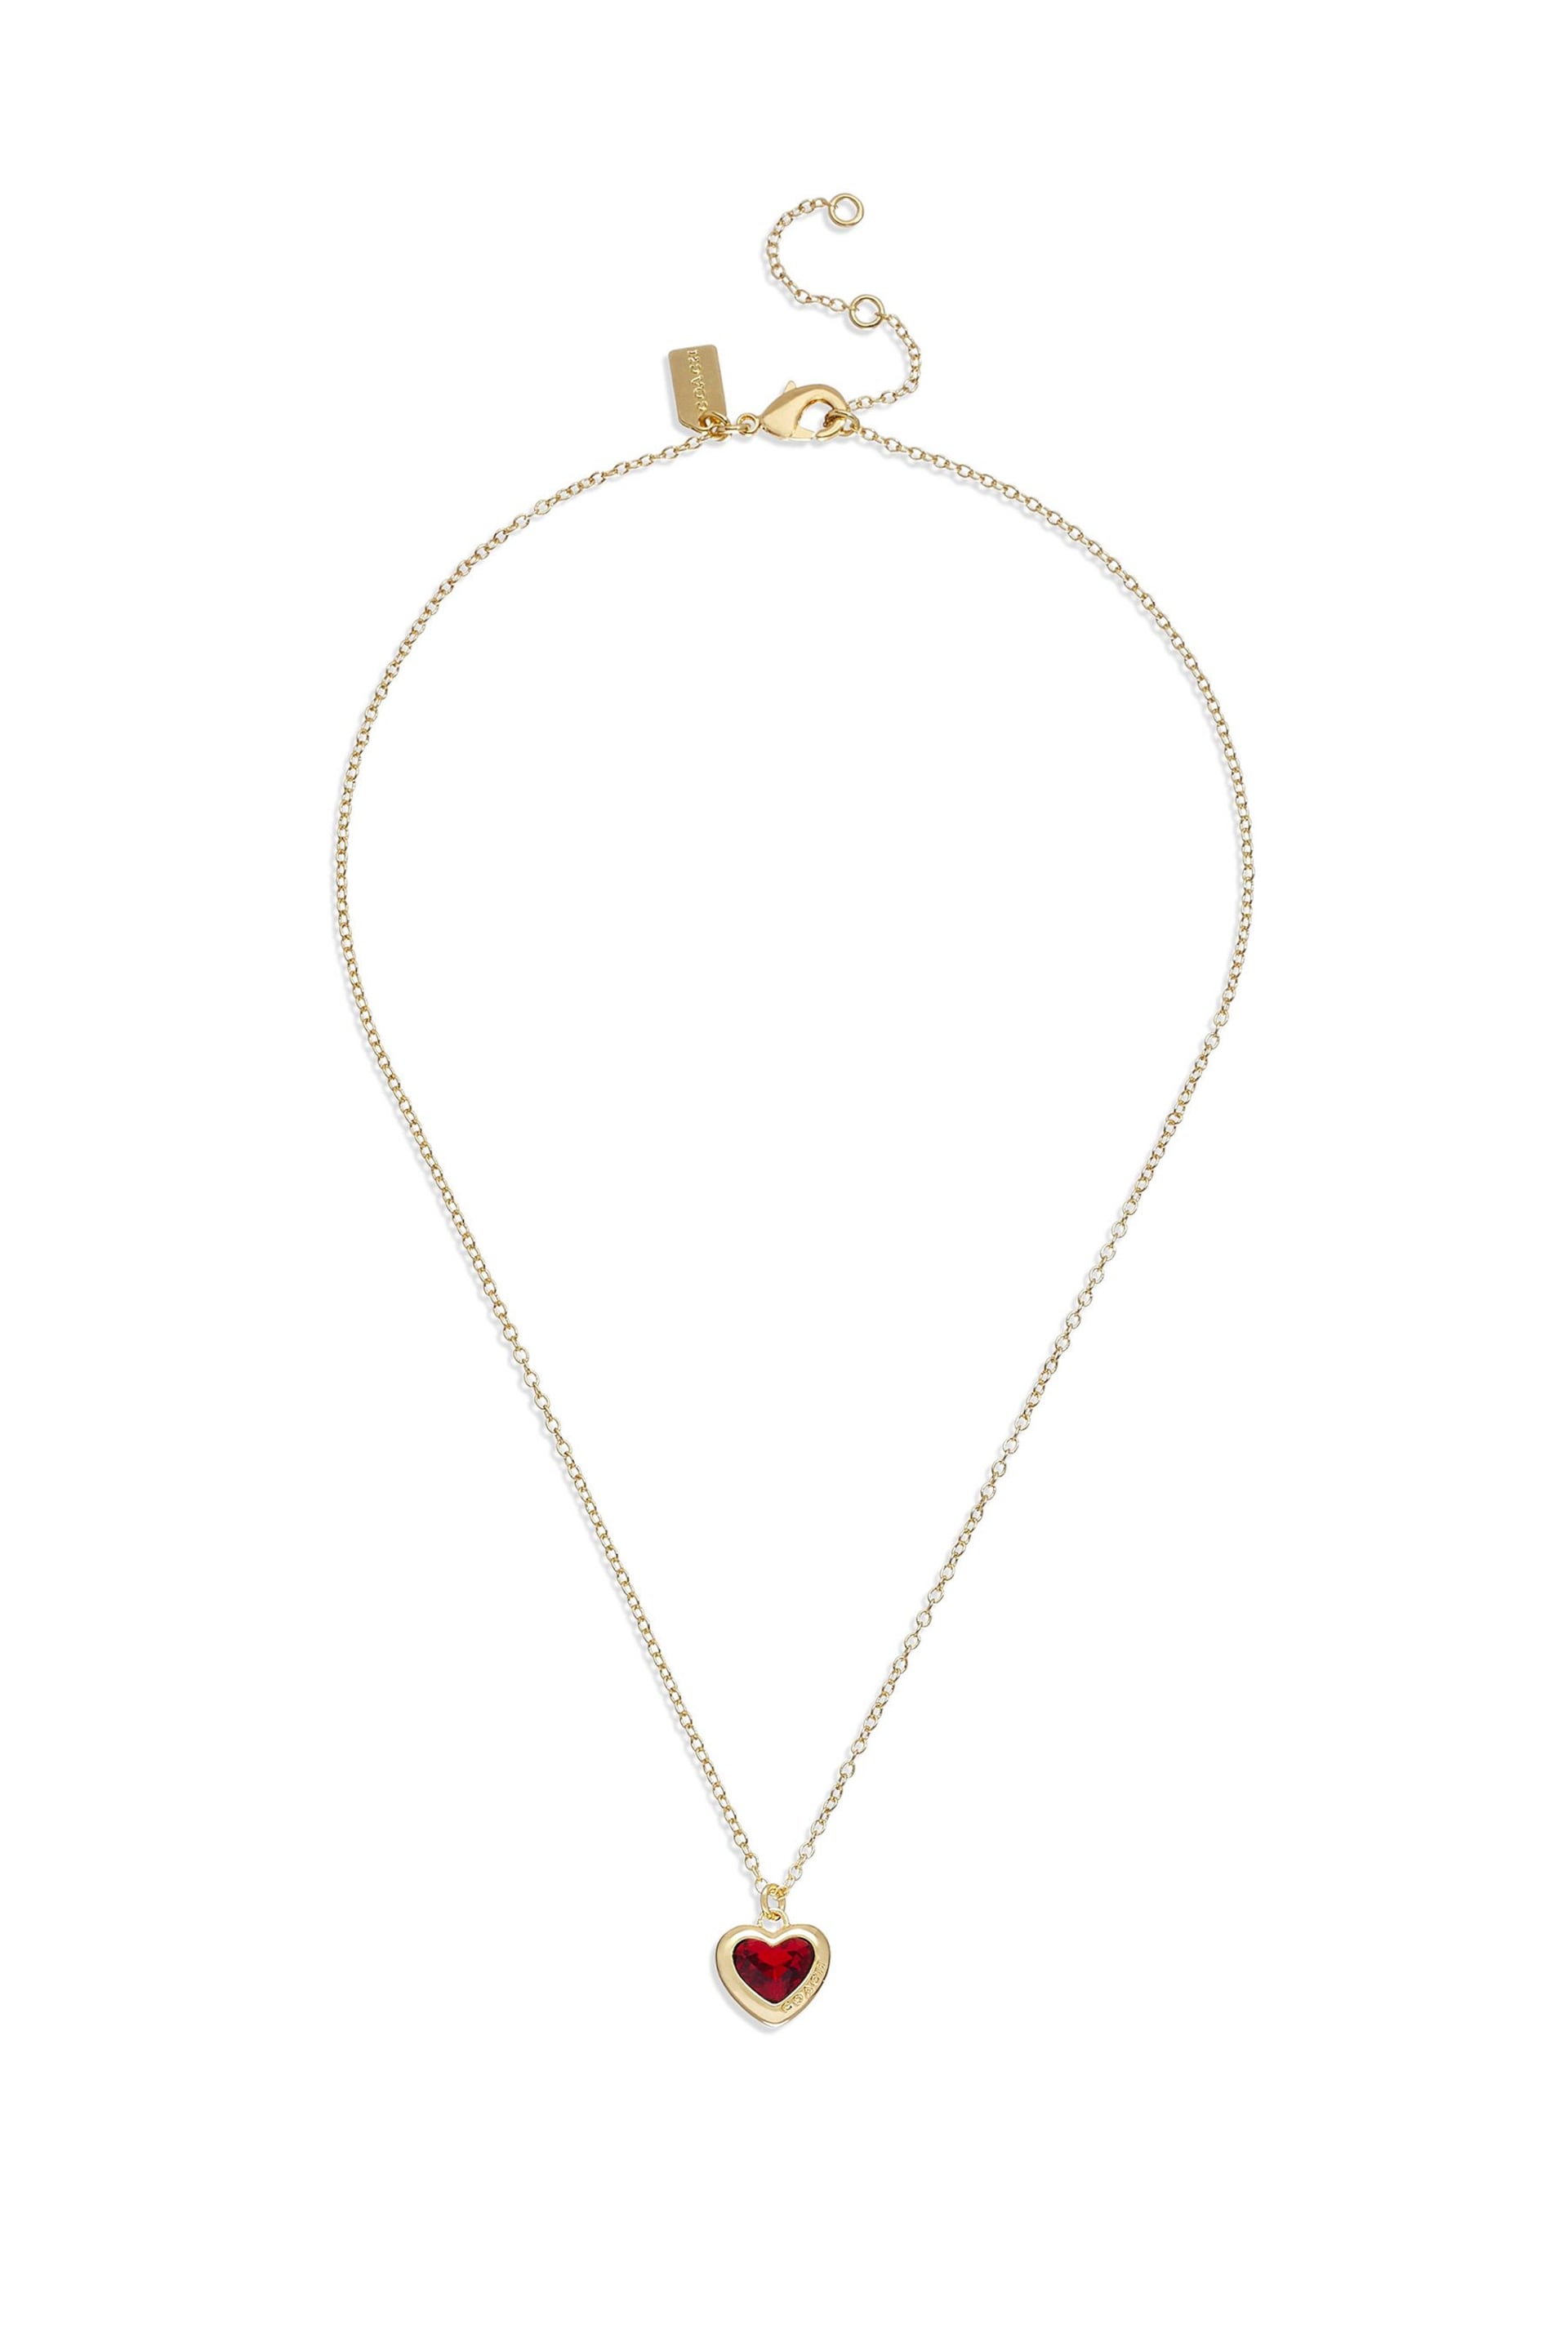 COACH Gold Tone Heart Pendant Necklace - Image 2 of 4